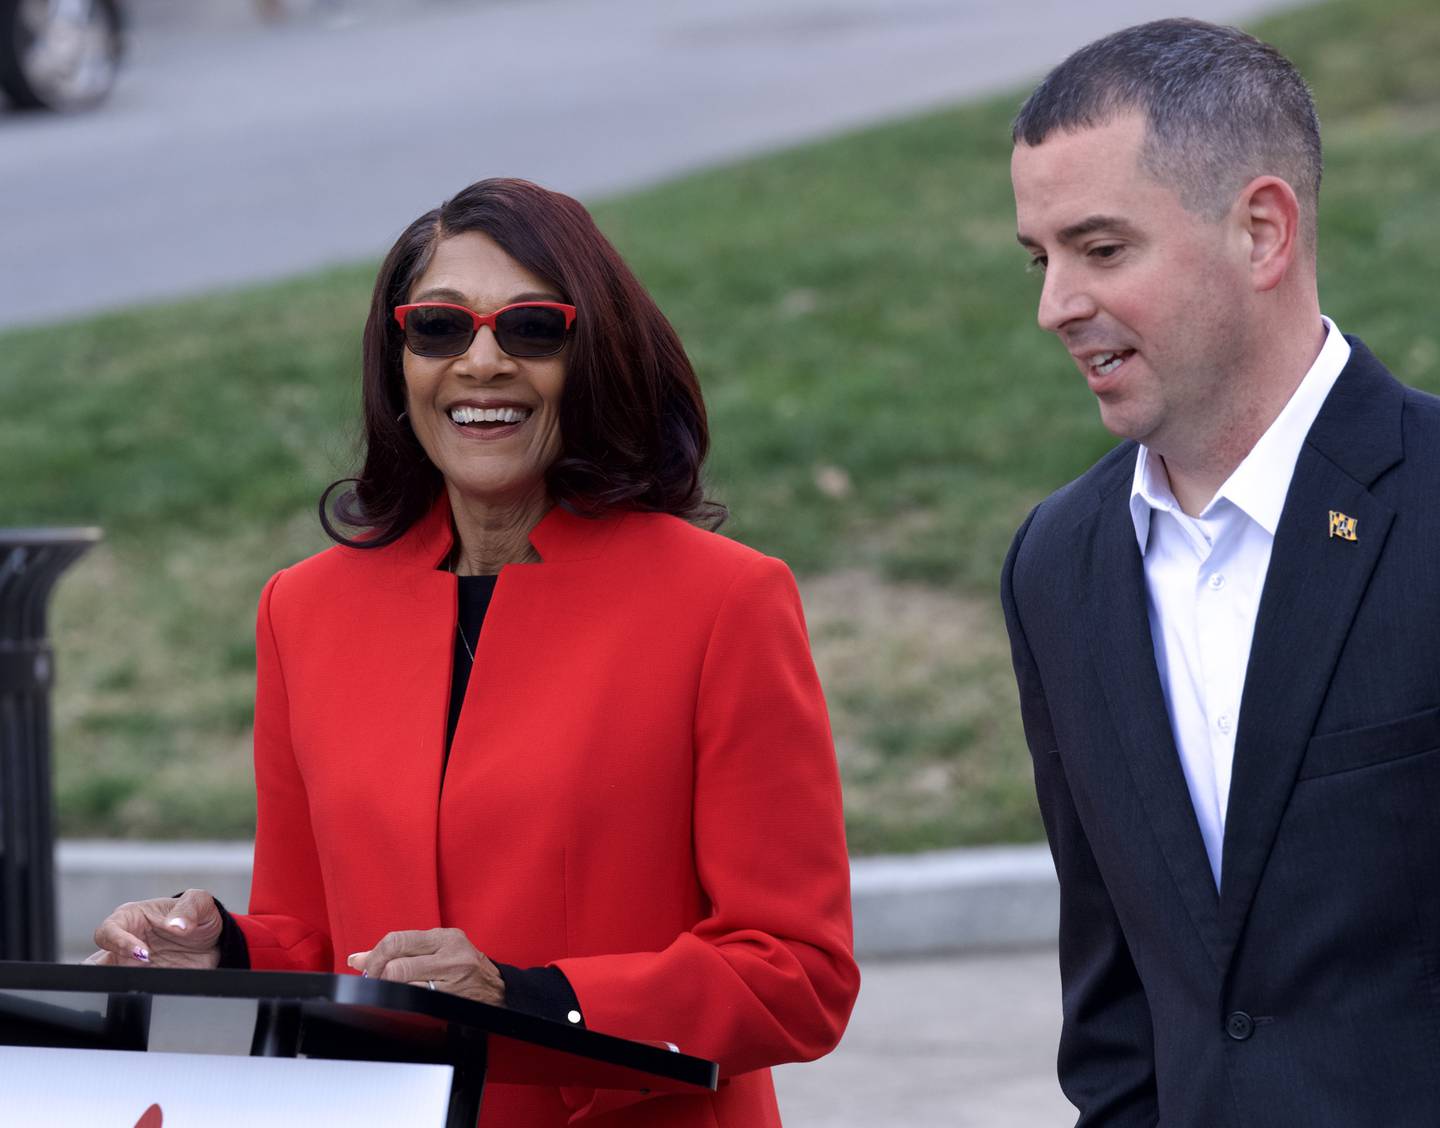 Sheila Dixon stands behind a lectern in a red suit jacket, wearing sunglasses and smiling broadly. To her left, Eric Costello wears a dark suit and white shirt.